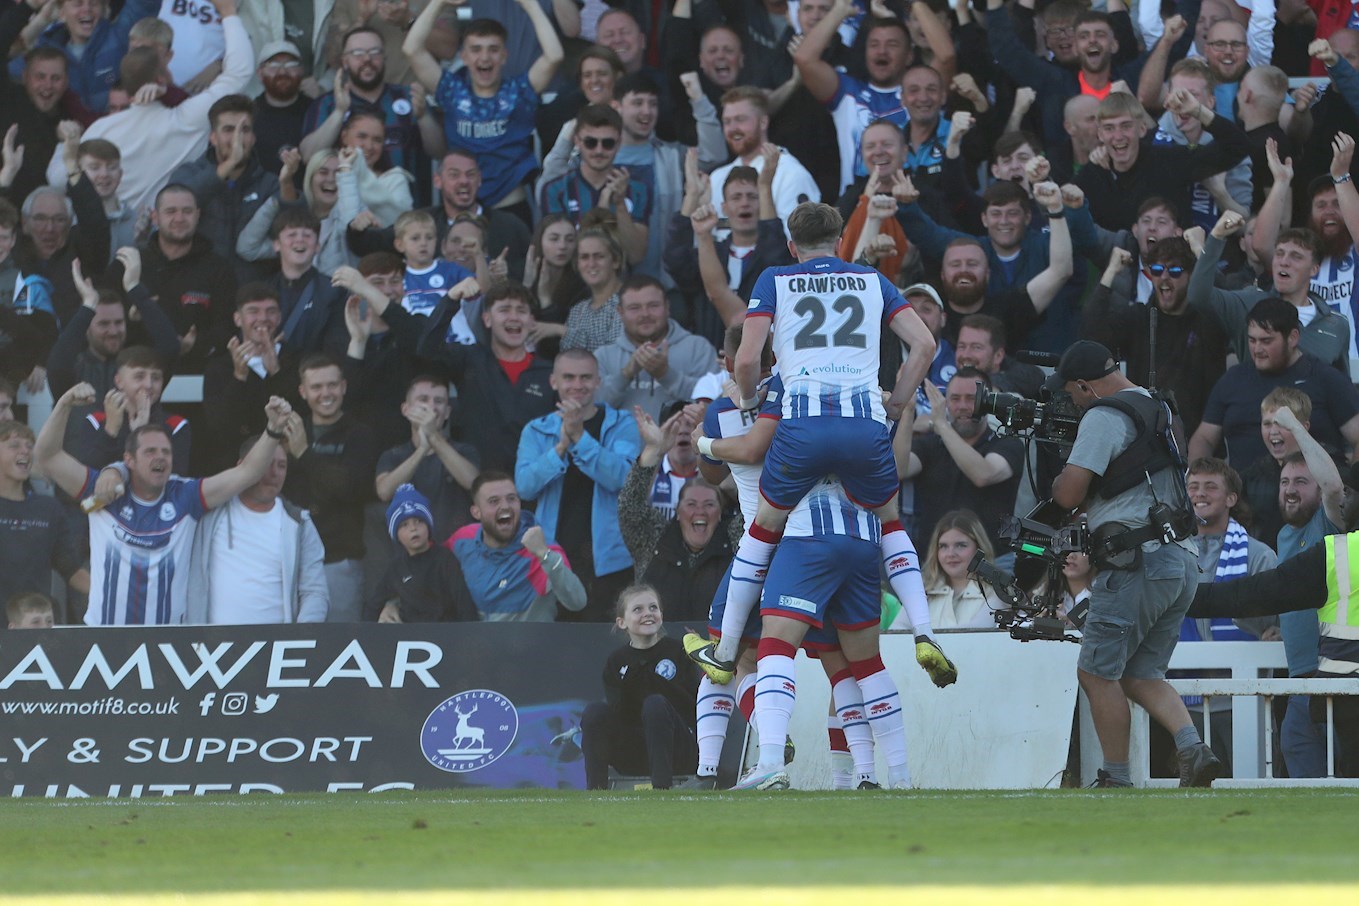 Hartlepool United vs Chesterfield on 16 Dec 23 - Match Centre - Hartlepool  United